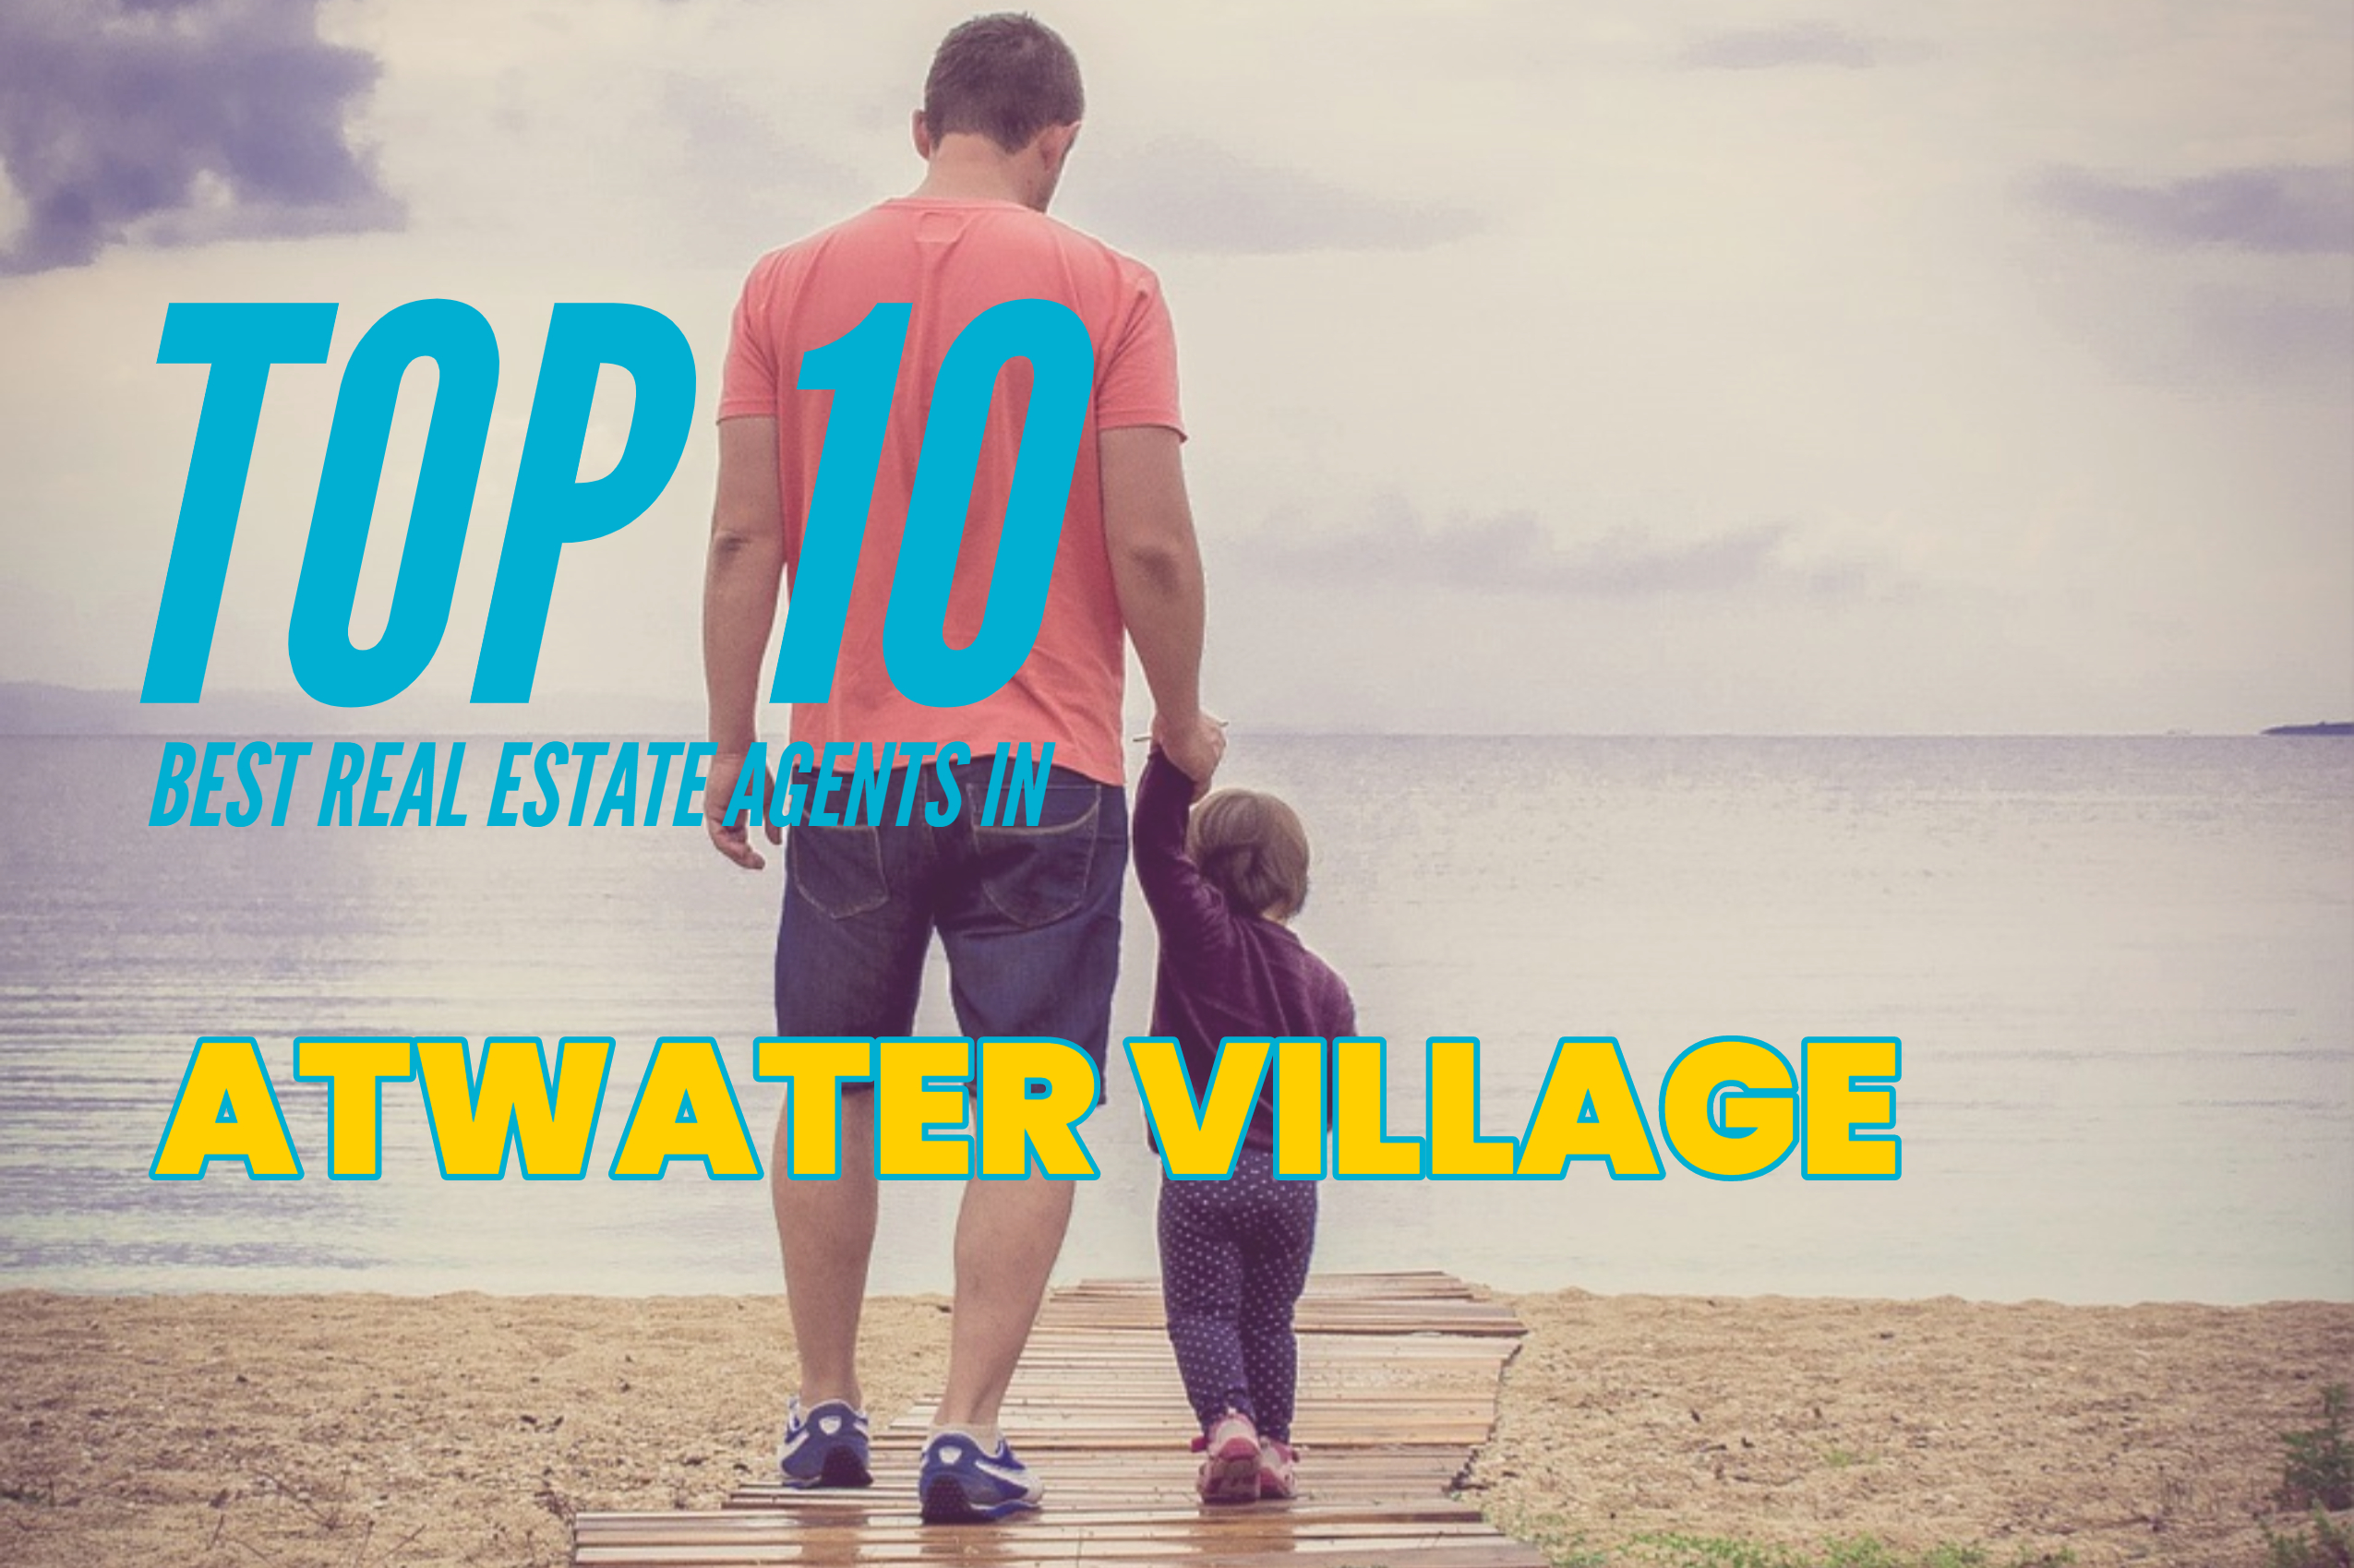 TOP 10 Real Estate Agents in Atwater Village